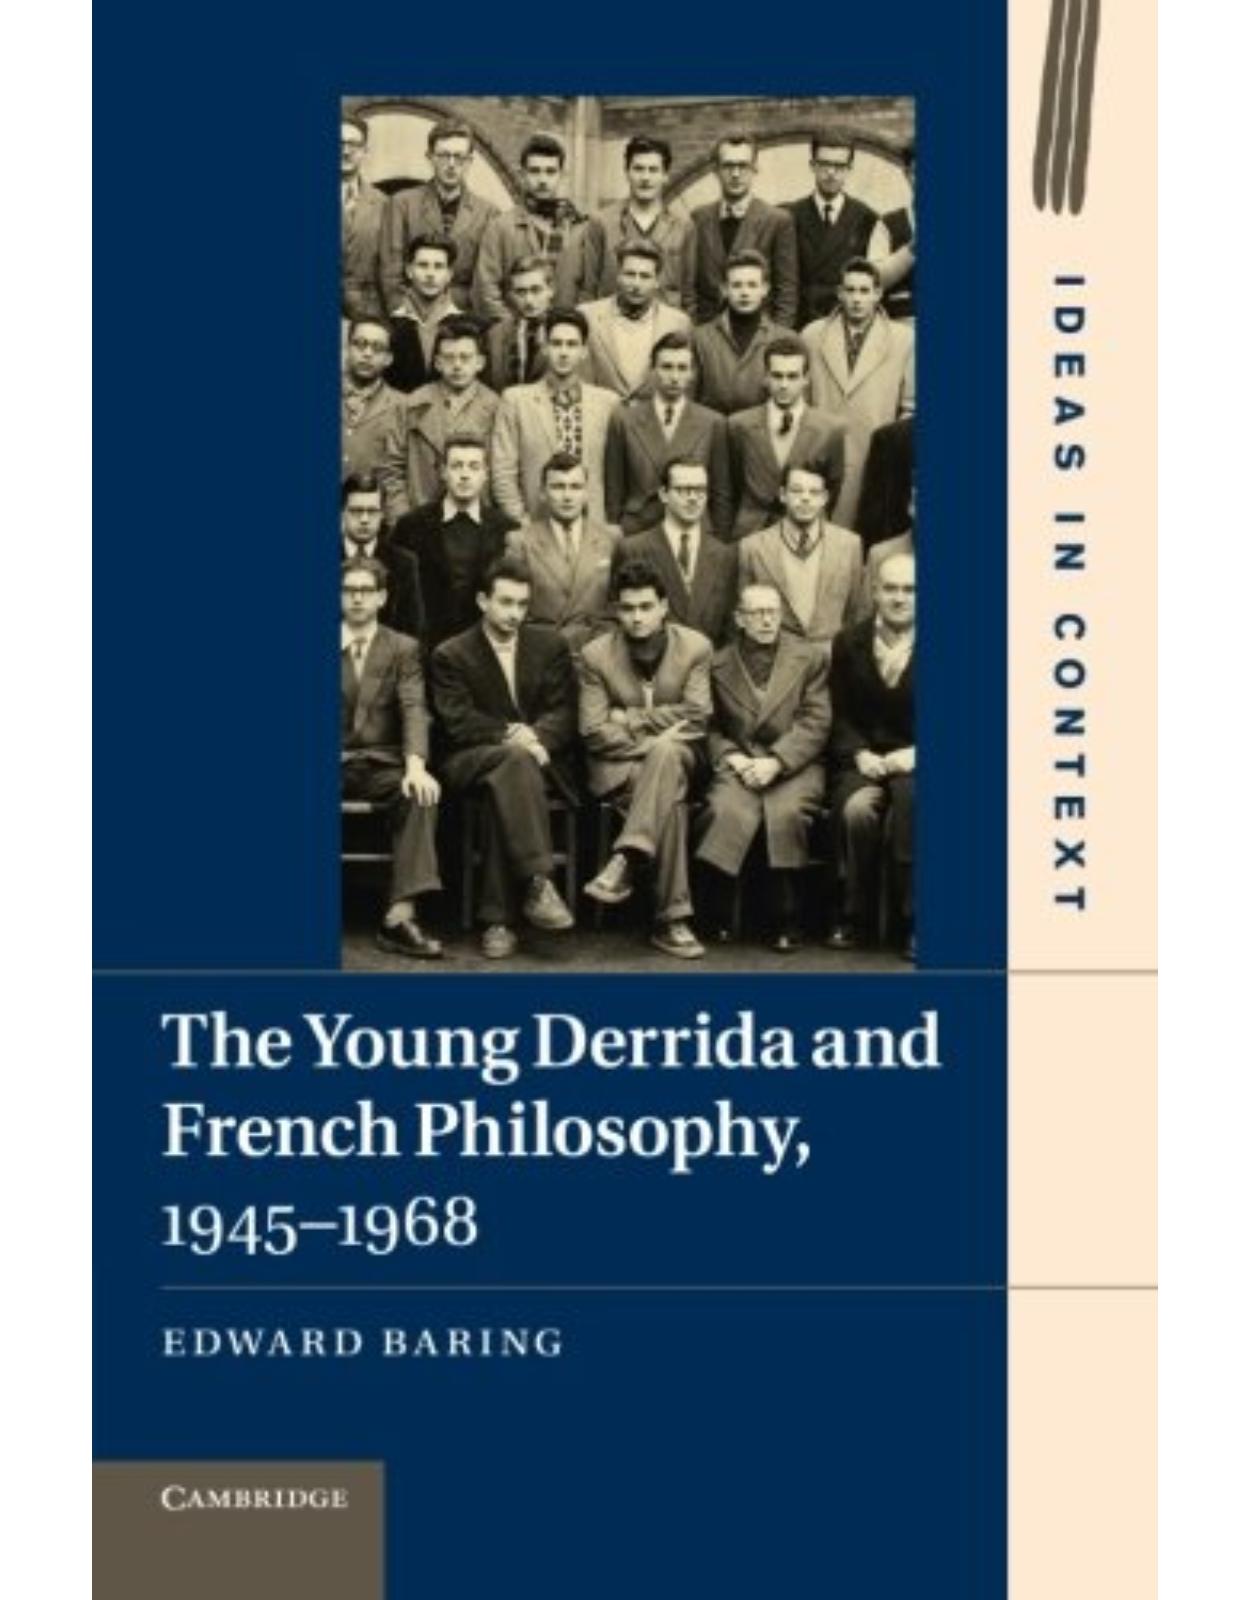 The Young Derrida and French Philosophy, 1945-1968 (Ideas in Context)